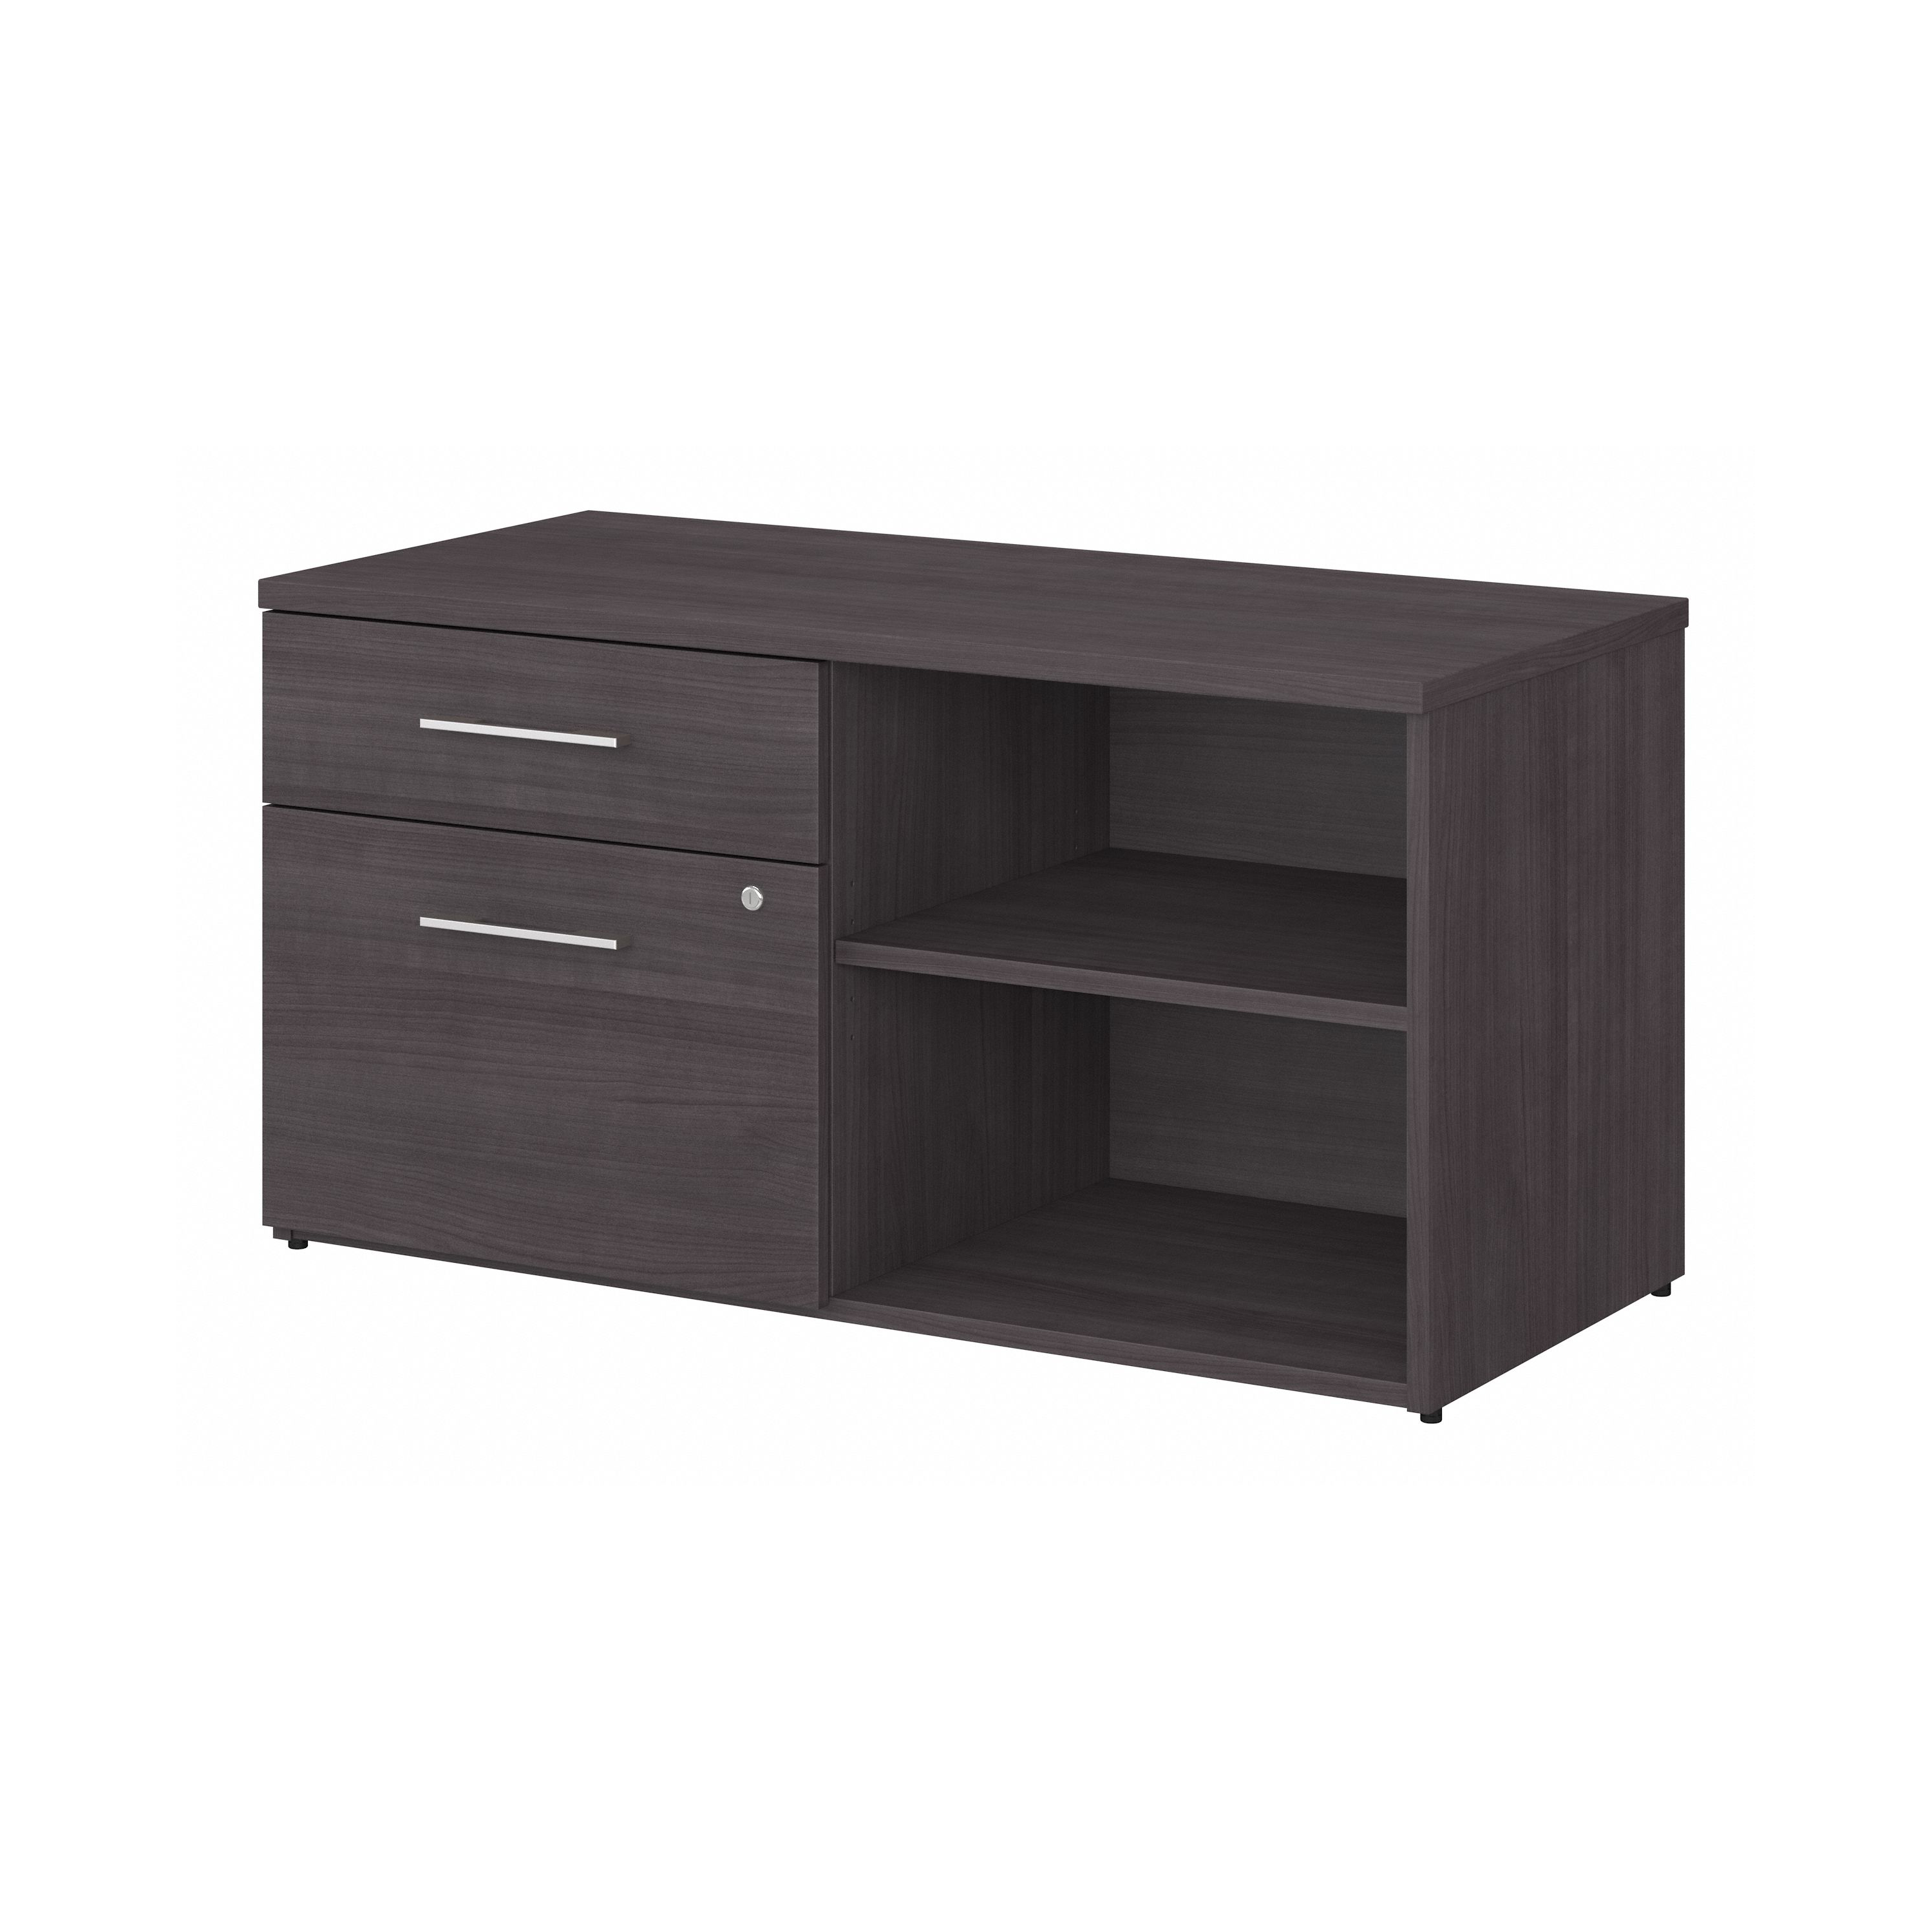 Shop Bush Business Furniture Office 500 Low Storage Cabinet with Drawers and Shelves 02 OFS145SG #color_storm gray